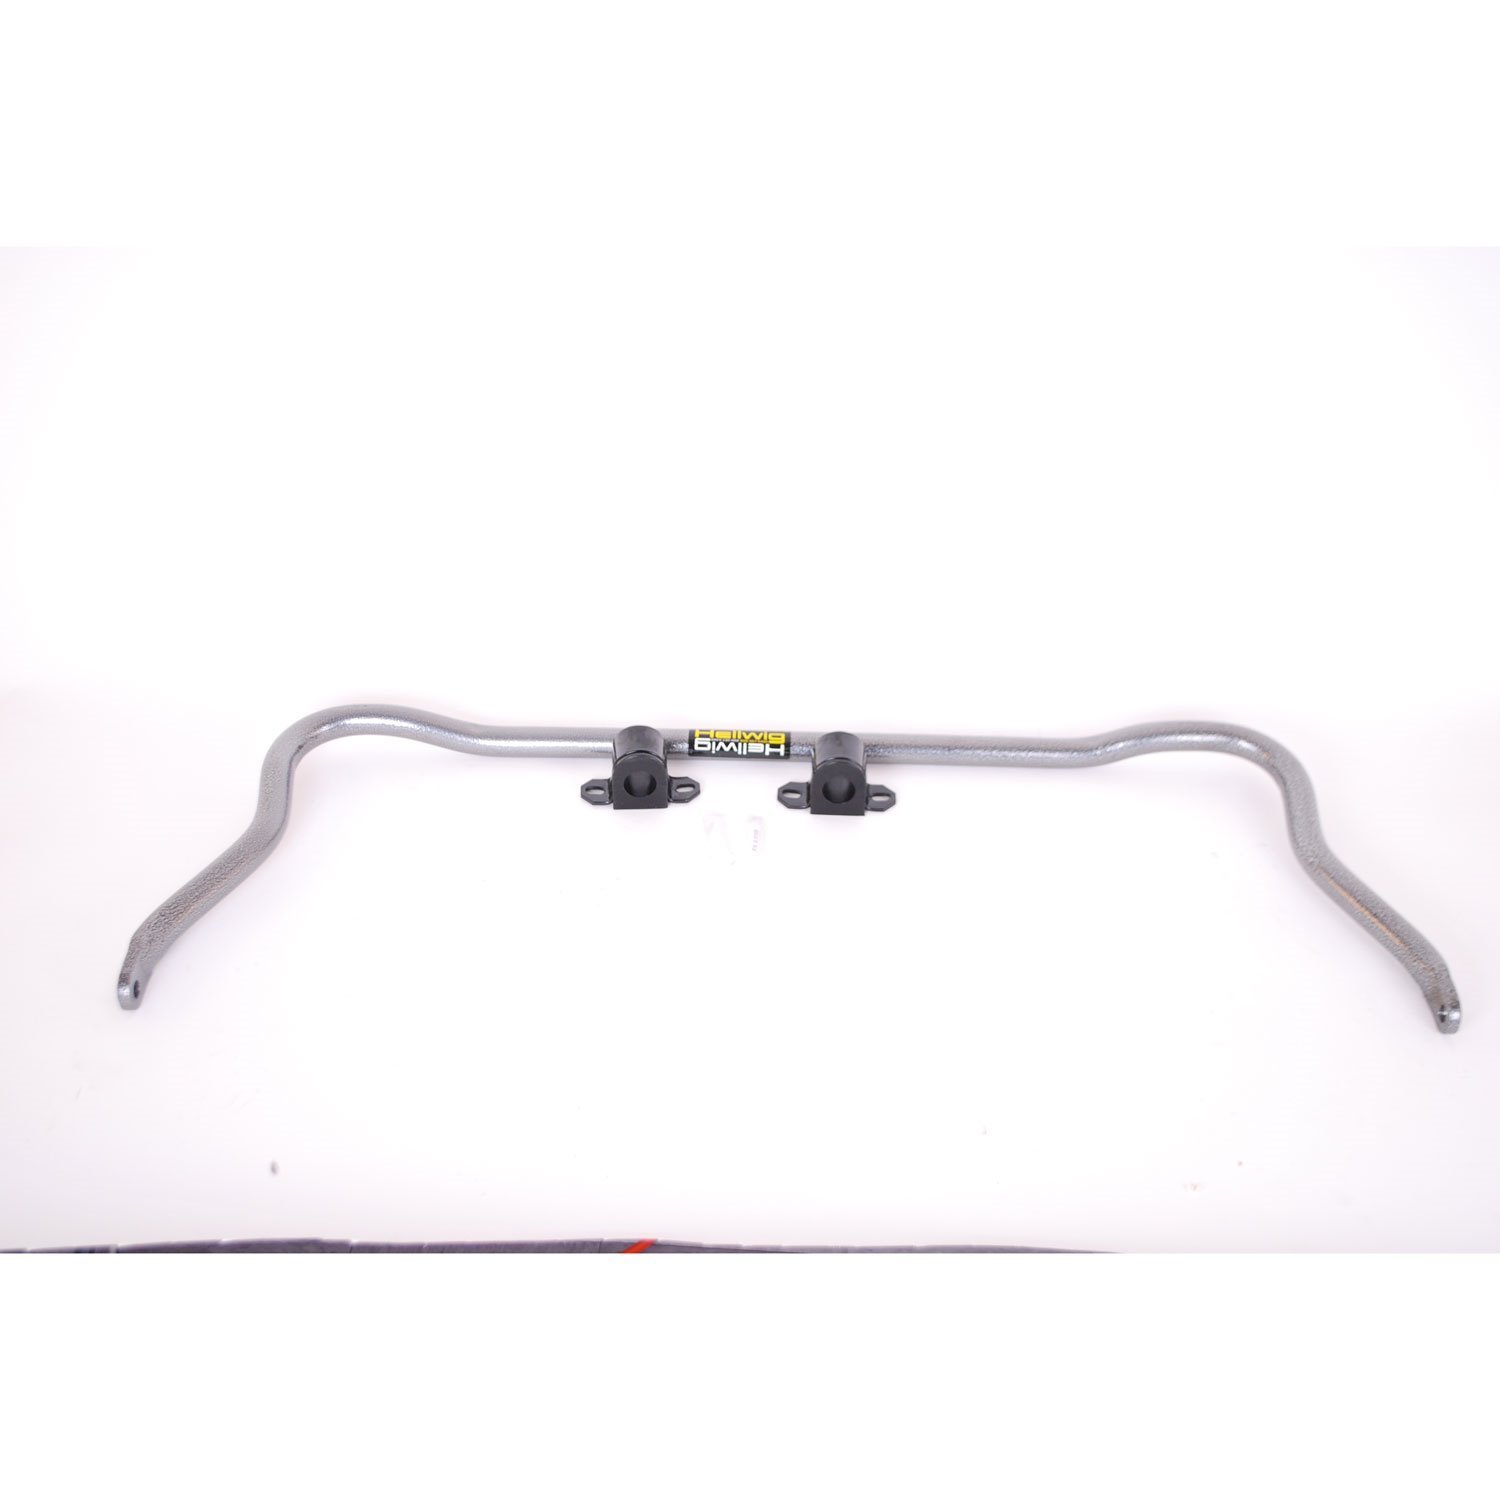 Front Sway Bar for 2008-2010 Ford F-250/F-350 Super Duty 4WD